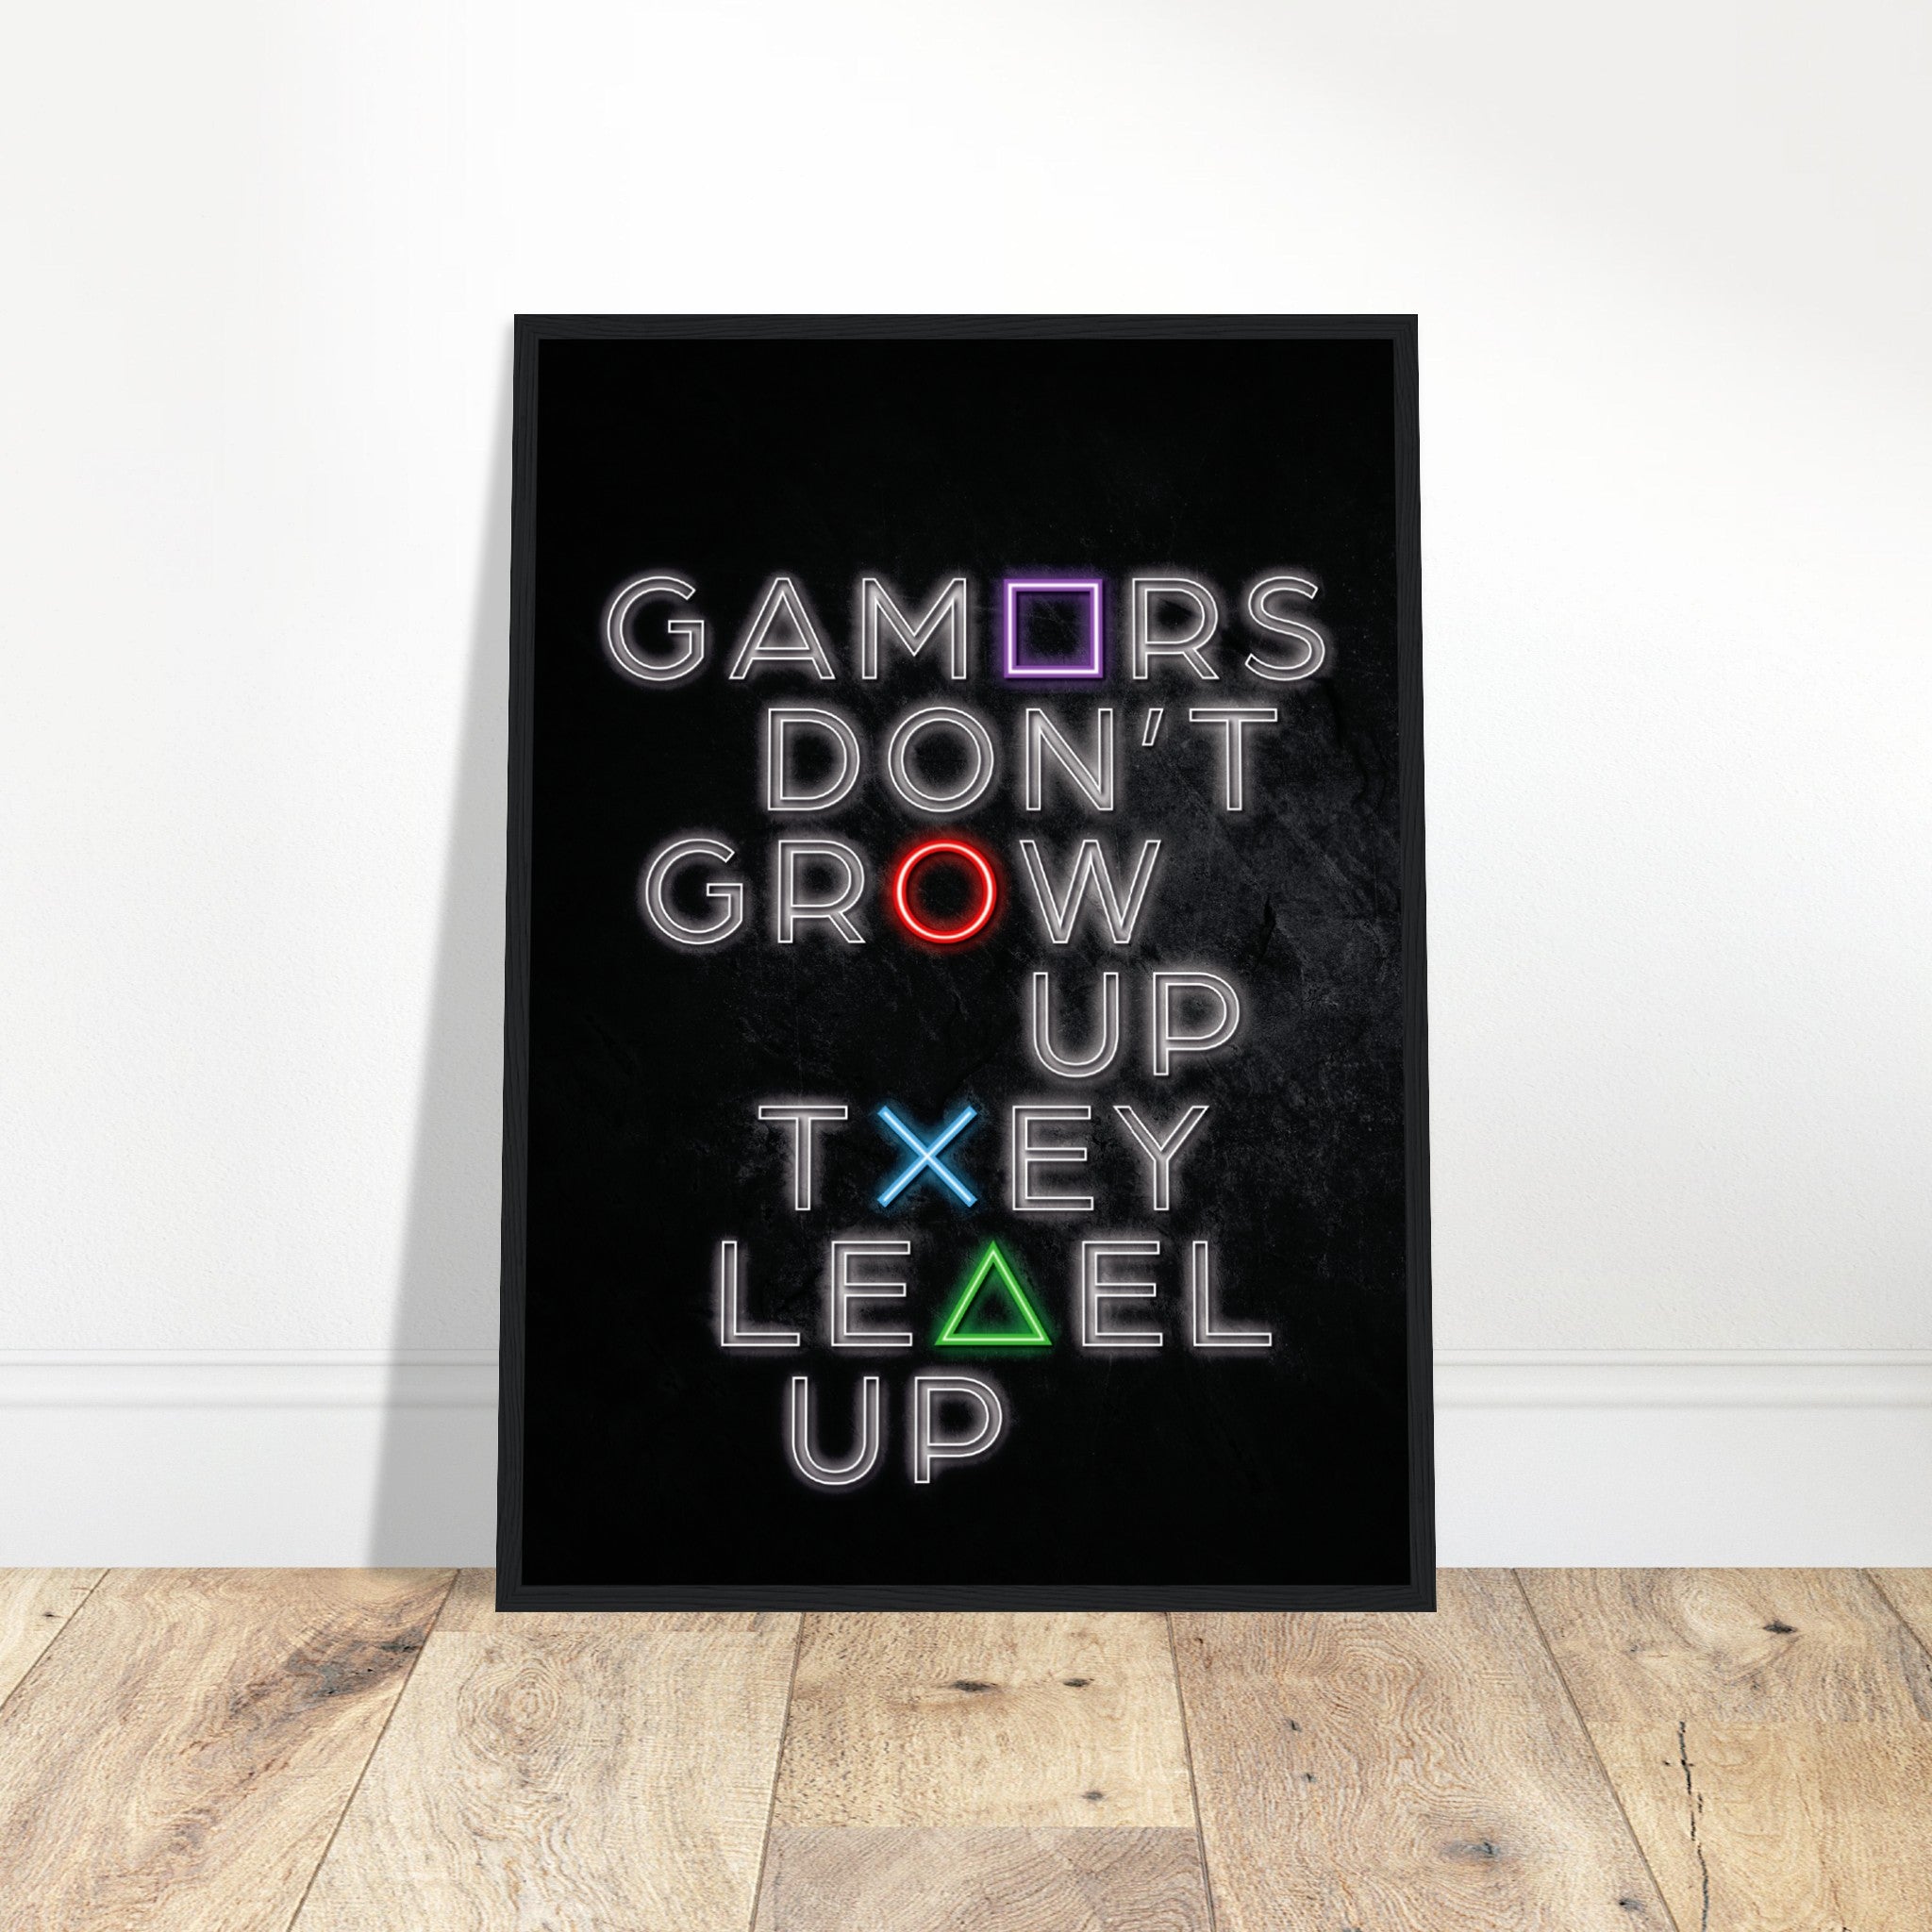 Gamers Level Up Grunge Poster